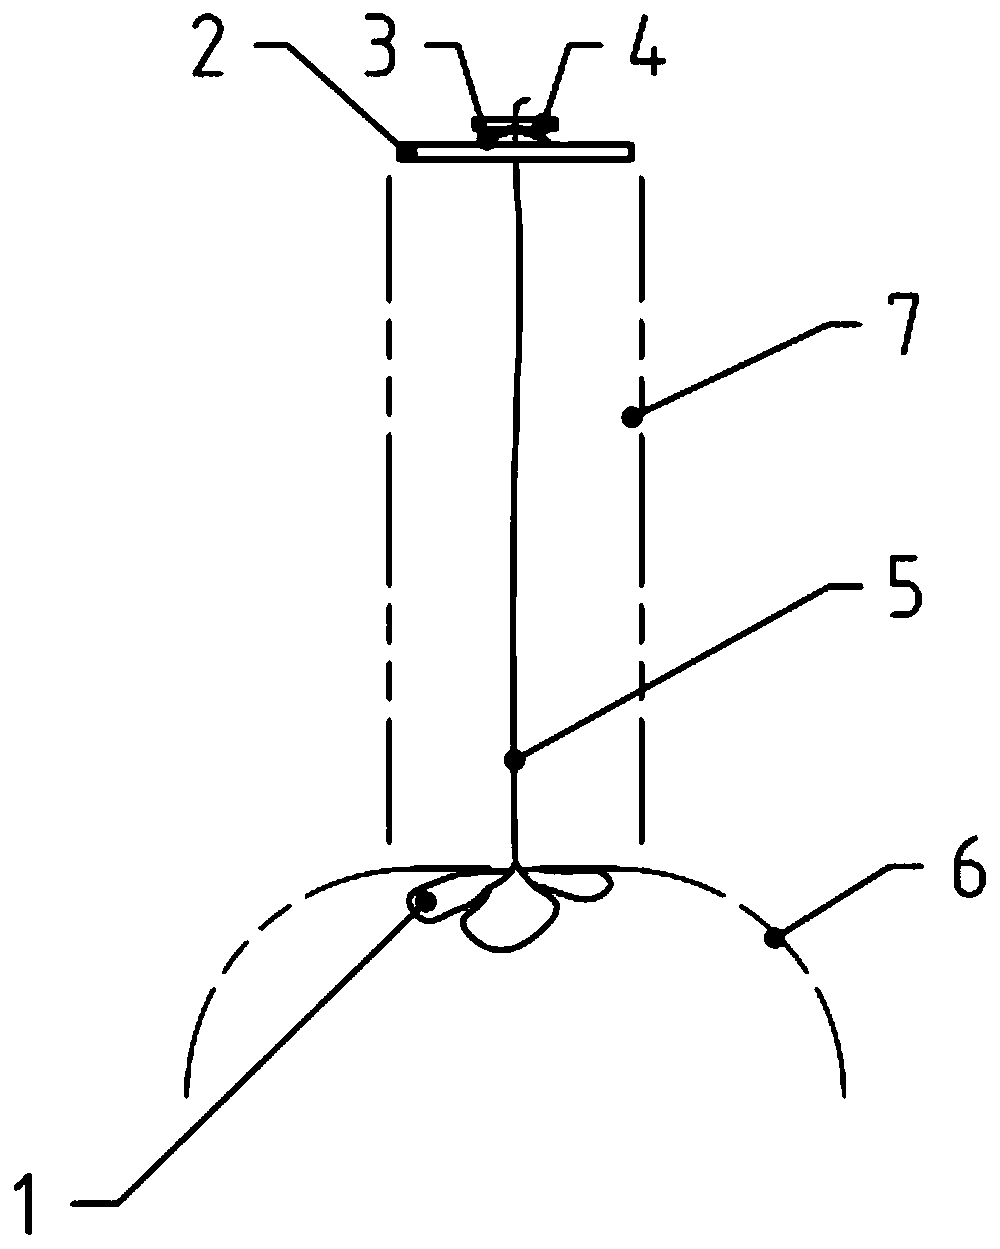 Endoscopic dura mater closing system and use method thereof